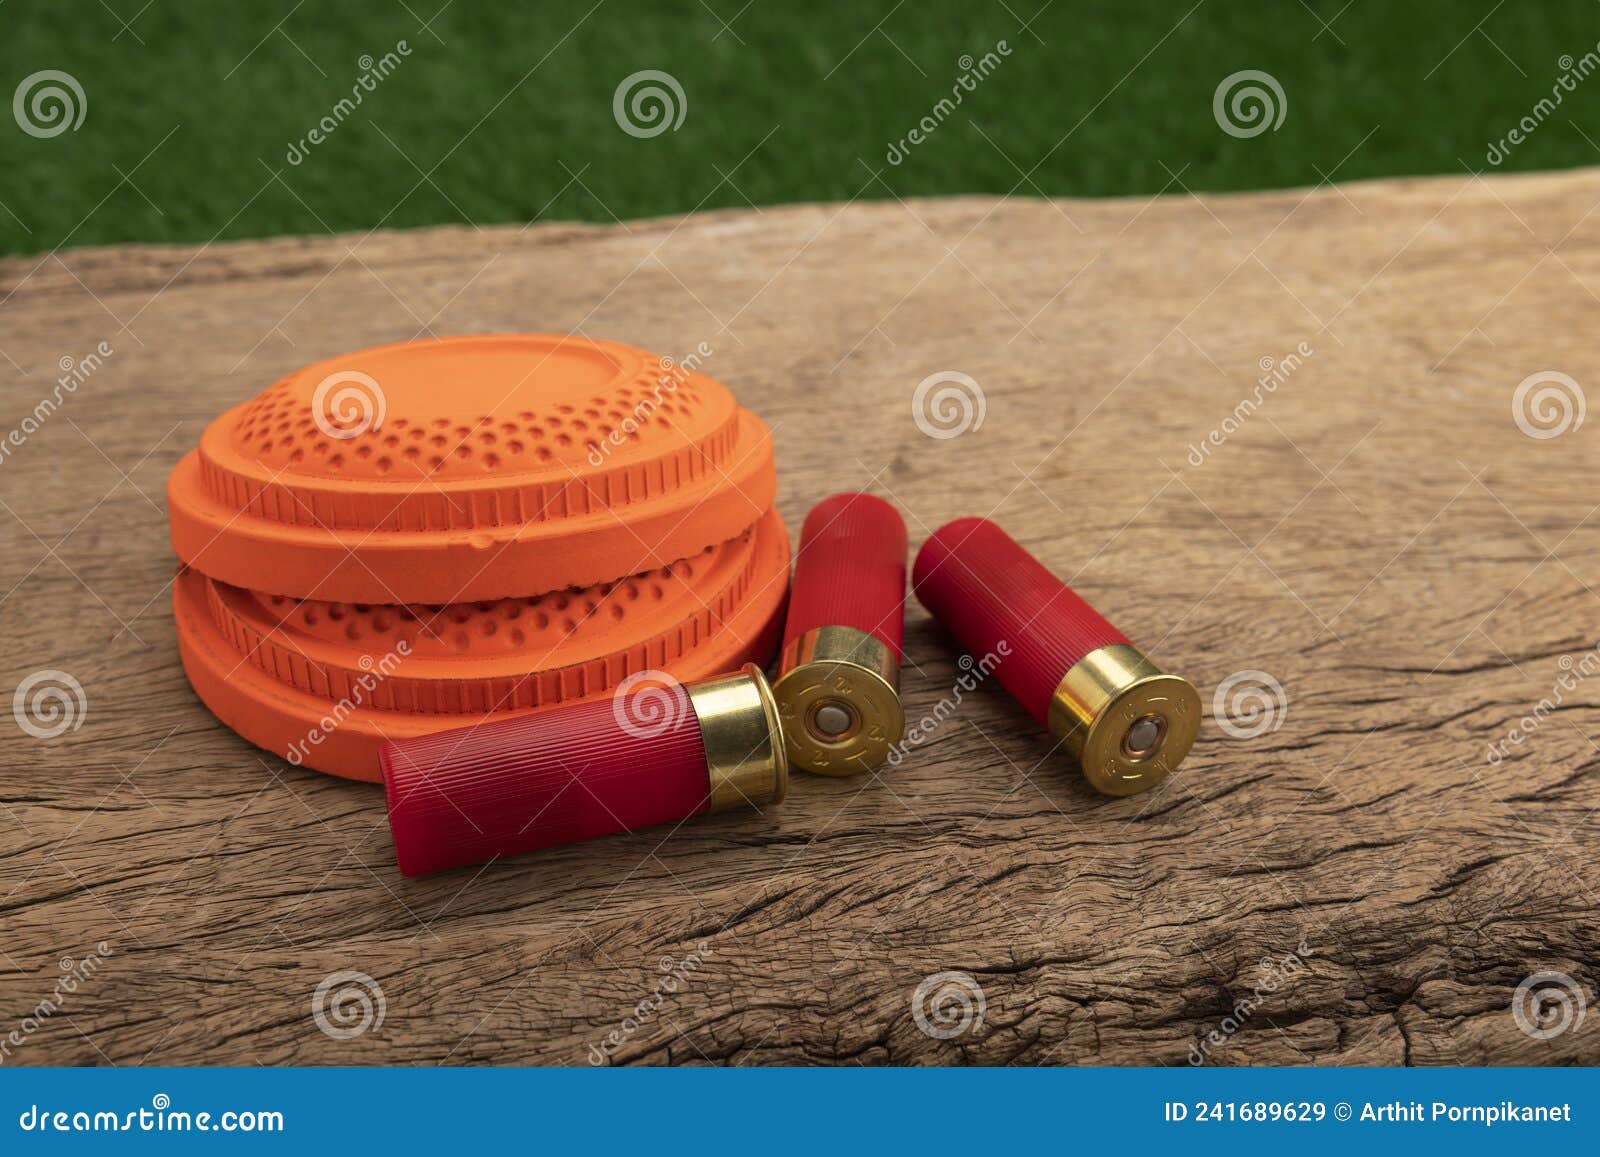 Clay Disc Flying Targets and Shotgun Bullets on Wooden Table Background ,Clay Pigeon Target Game Stock Image